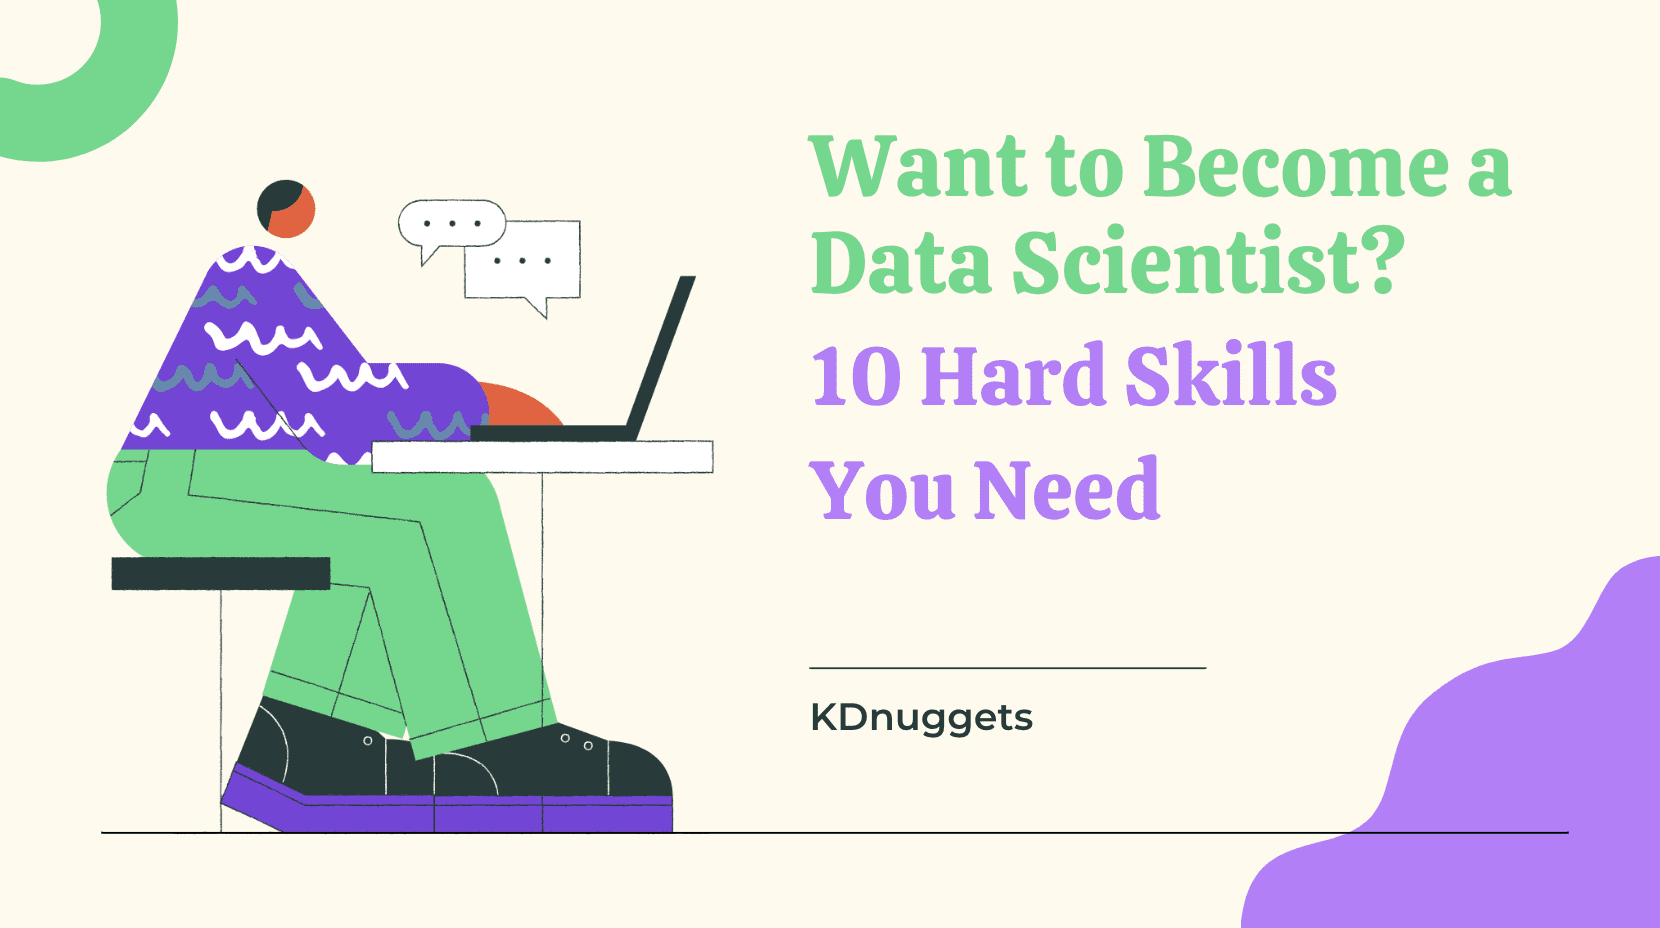 Want to Become a Data Scientist? Part 1: 10 Hard Skills You Need